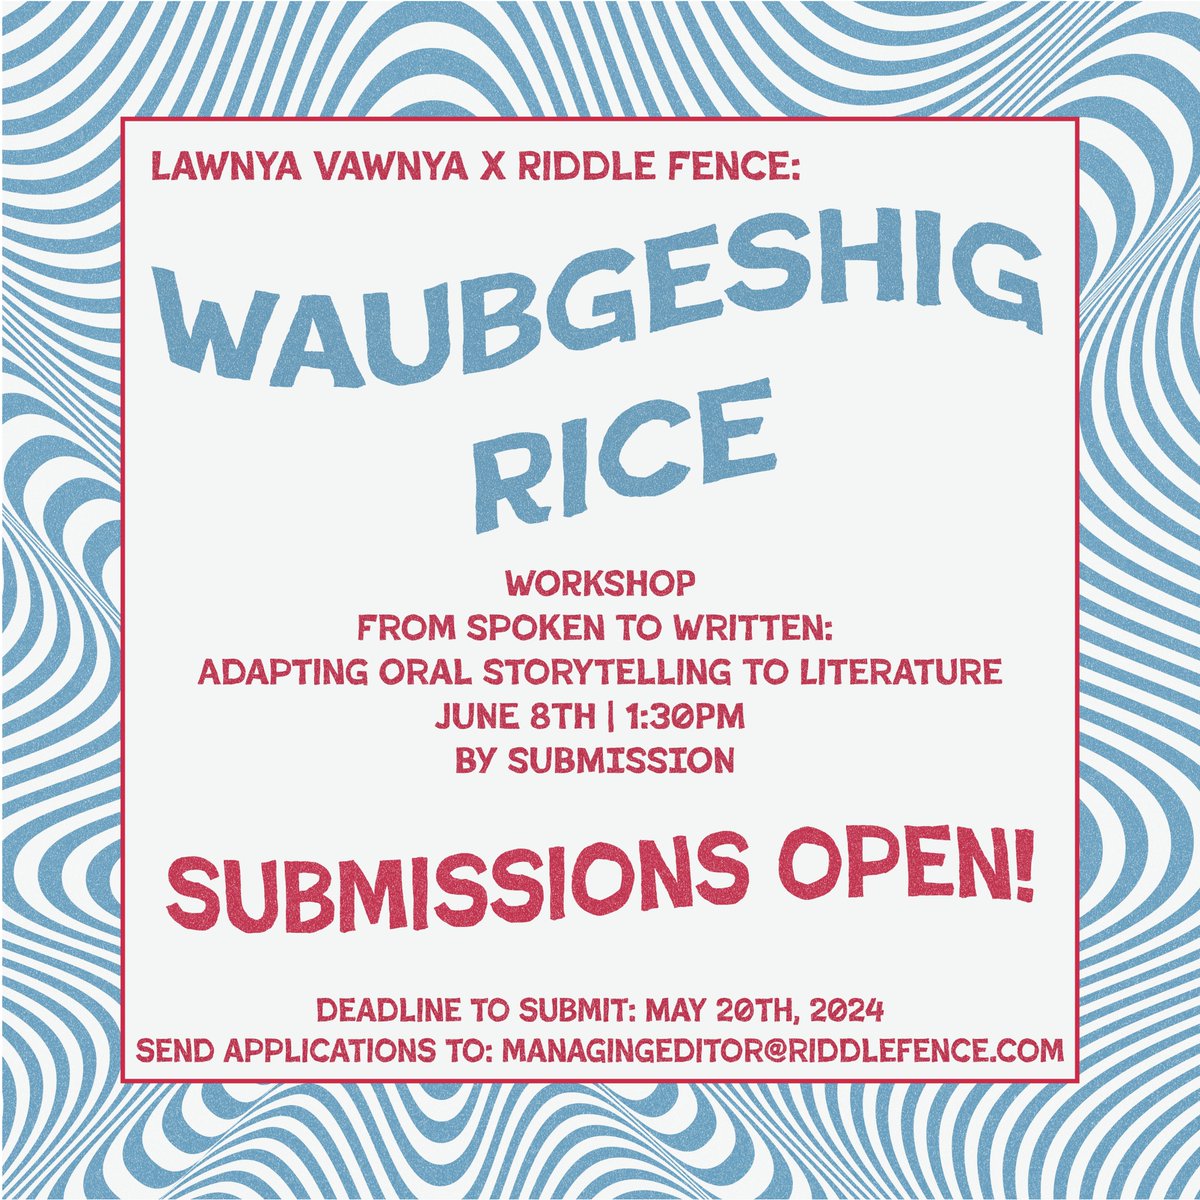 SUBMISSIONS OPEN! LV14 Workshop Series x @RiddleFence present @waub Rice - From Spoken To Written: Adapting Oral Storytelling To Literature Applicants should send a maximum 1 page letter of interest and a 1 page writing sample to managingeditor@riddlefence.com by May 20th, 2024